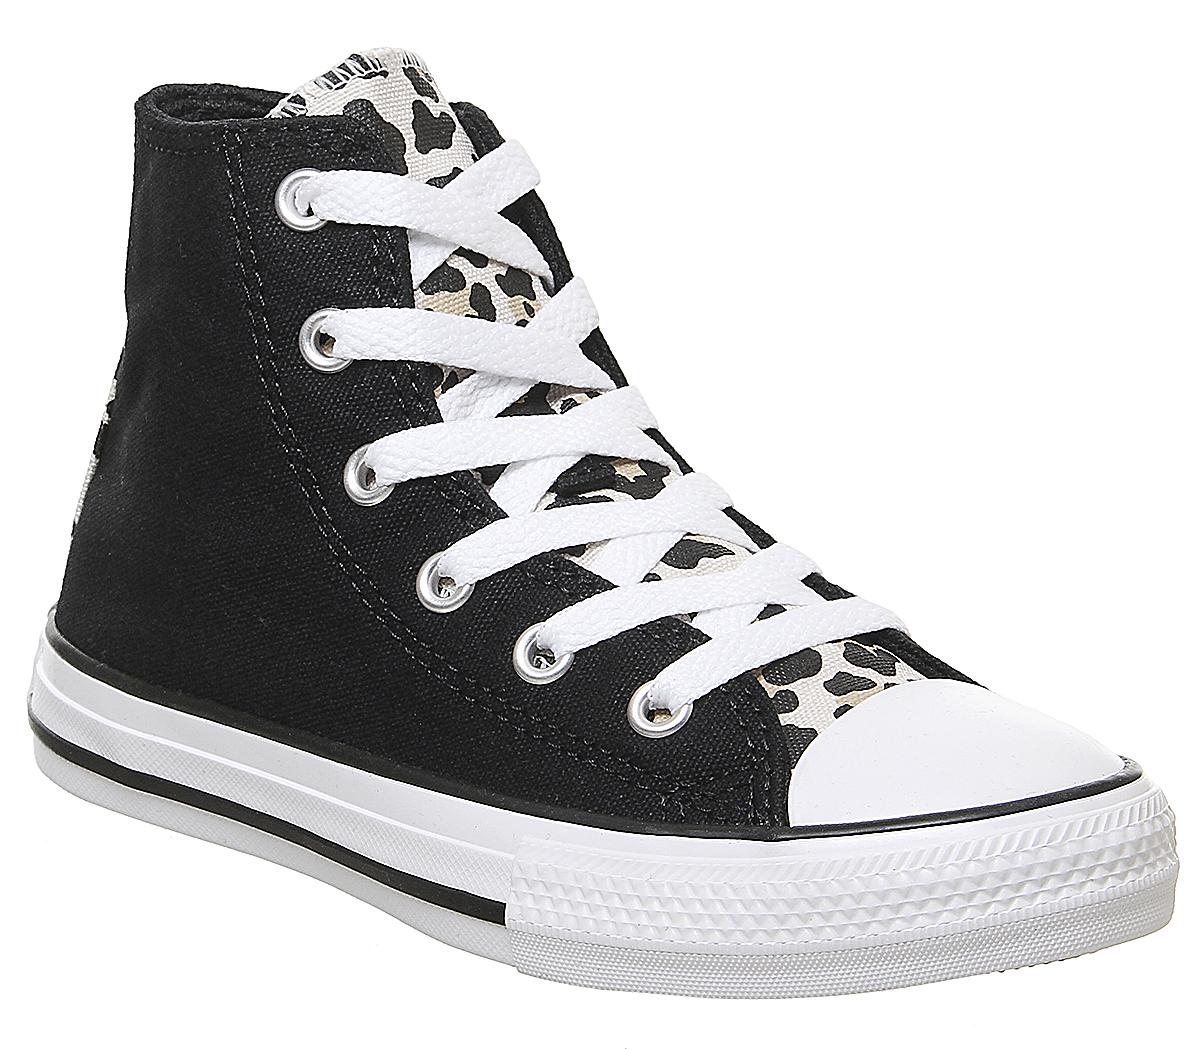 ConverseAll Star Hi Mid Sizes TrainersBlack Driftwood White Leopard Tongue